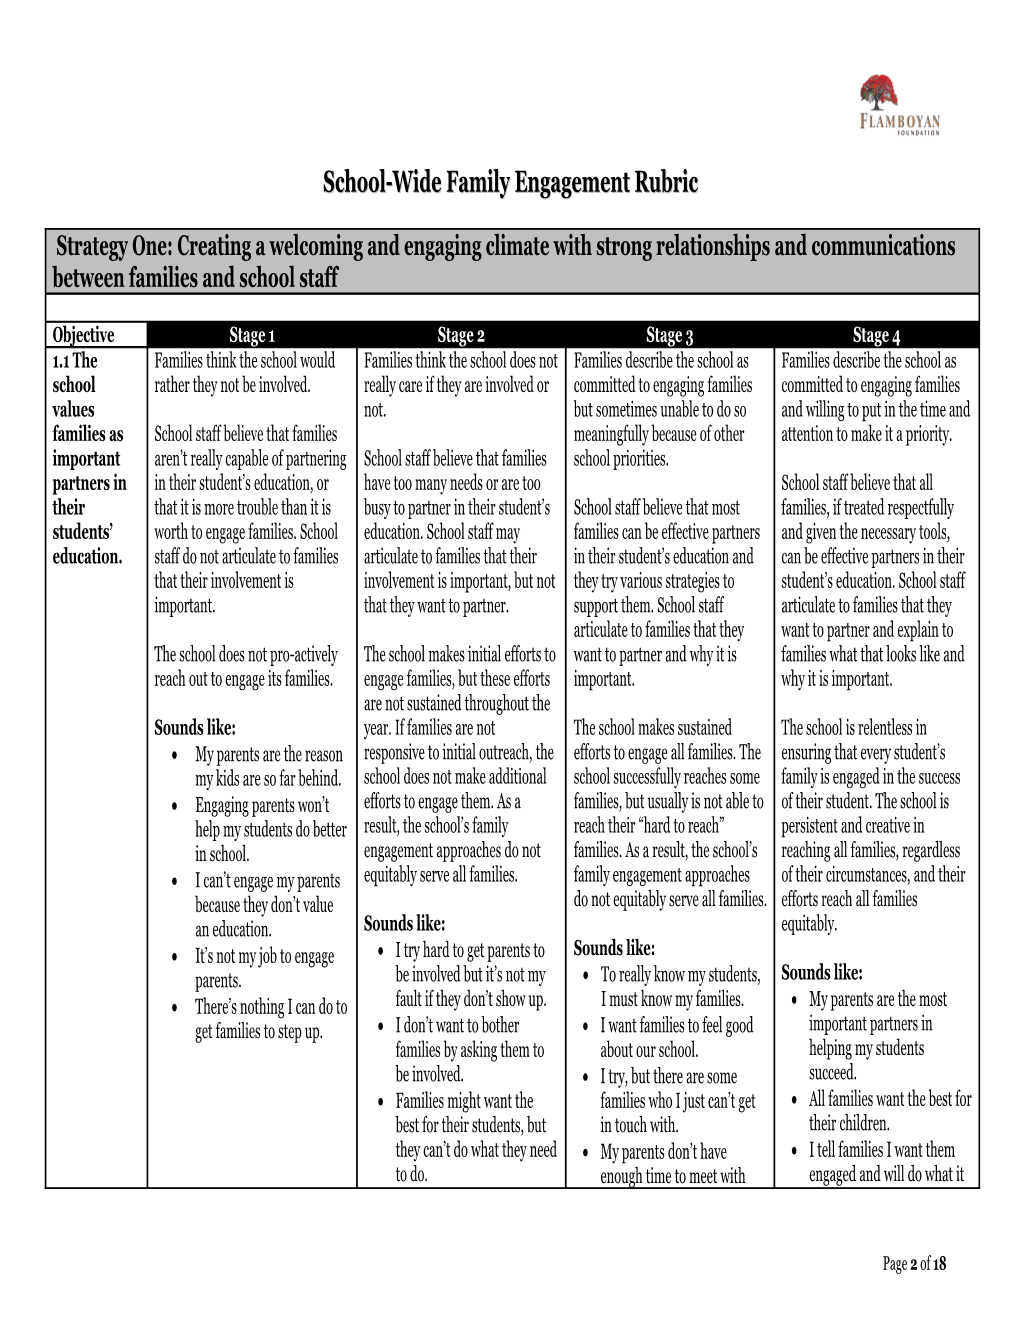 School-Wide Family Engagement Rubric